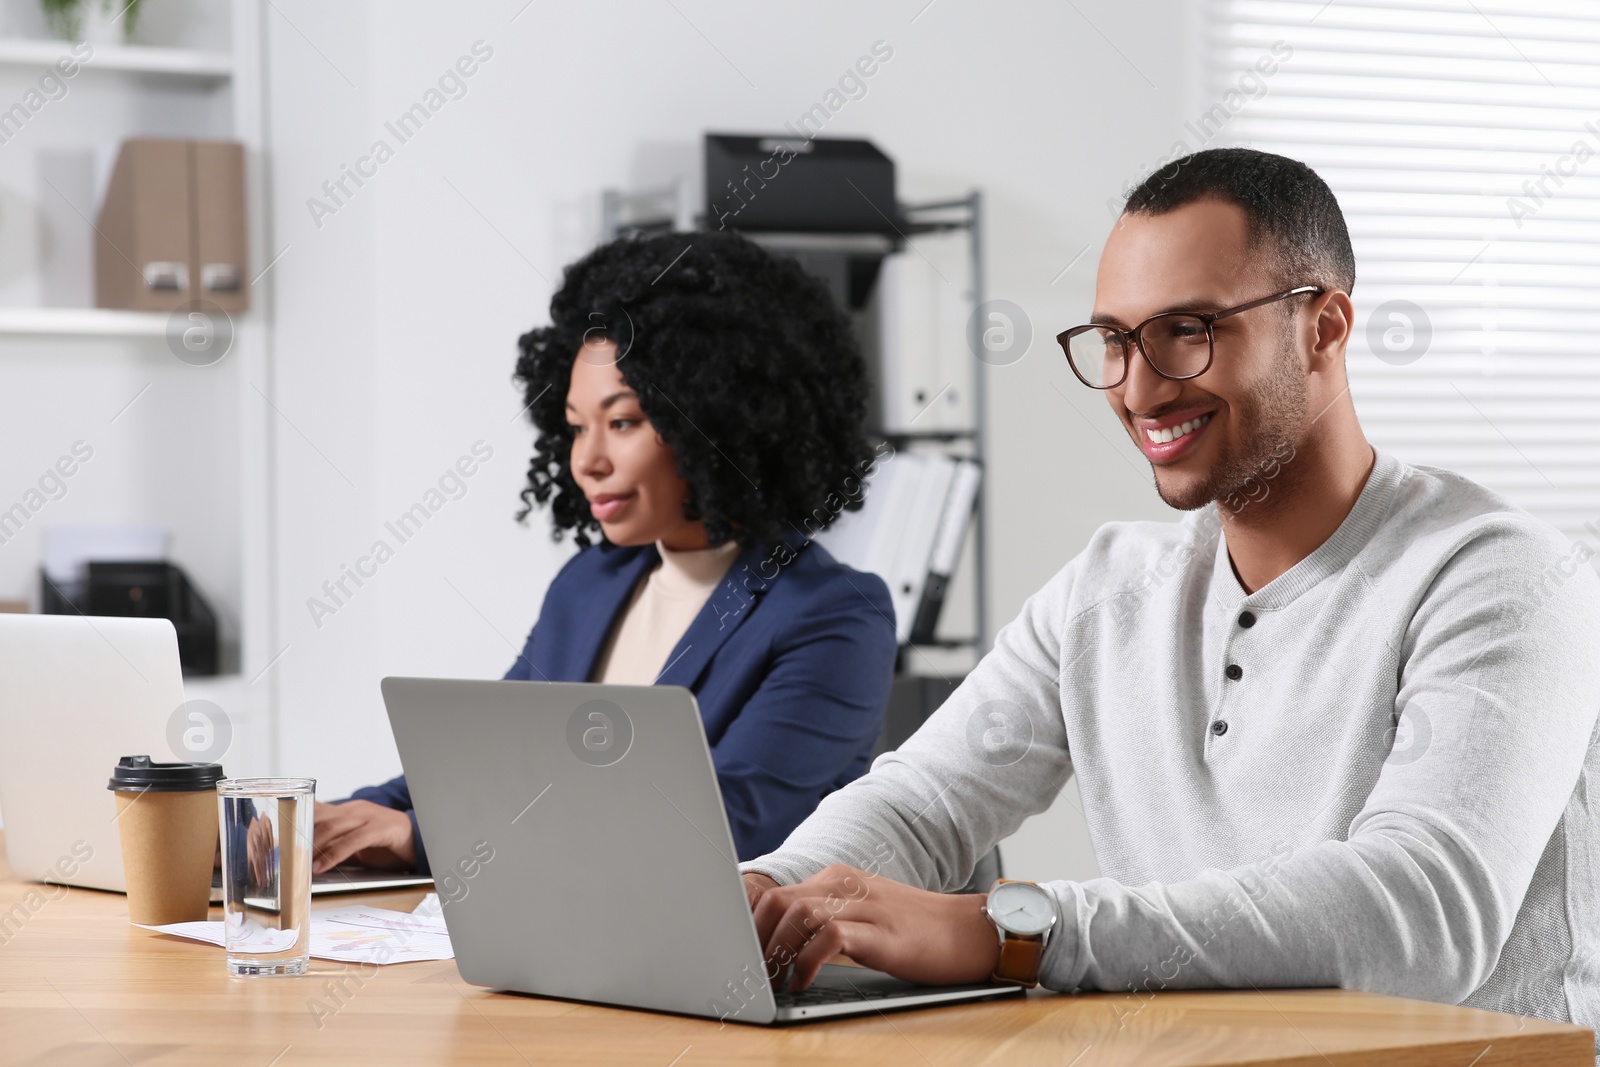 Photo of Young colleagues working together at table in office